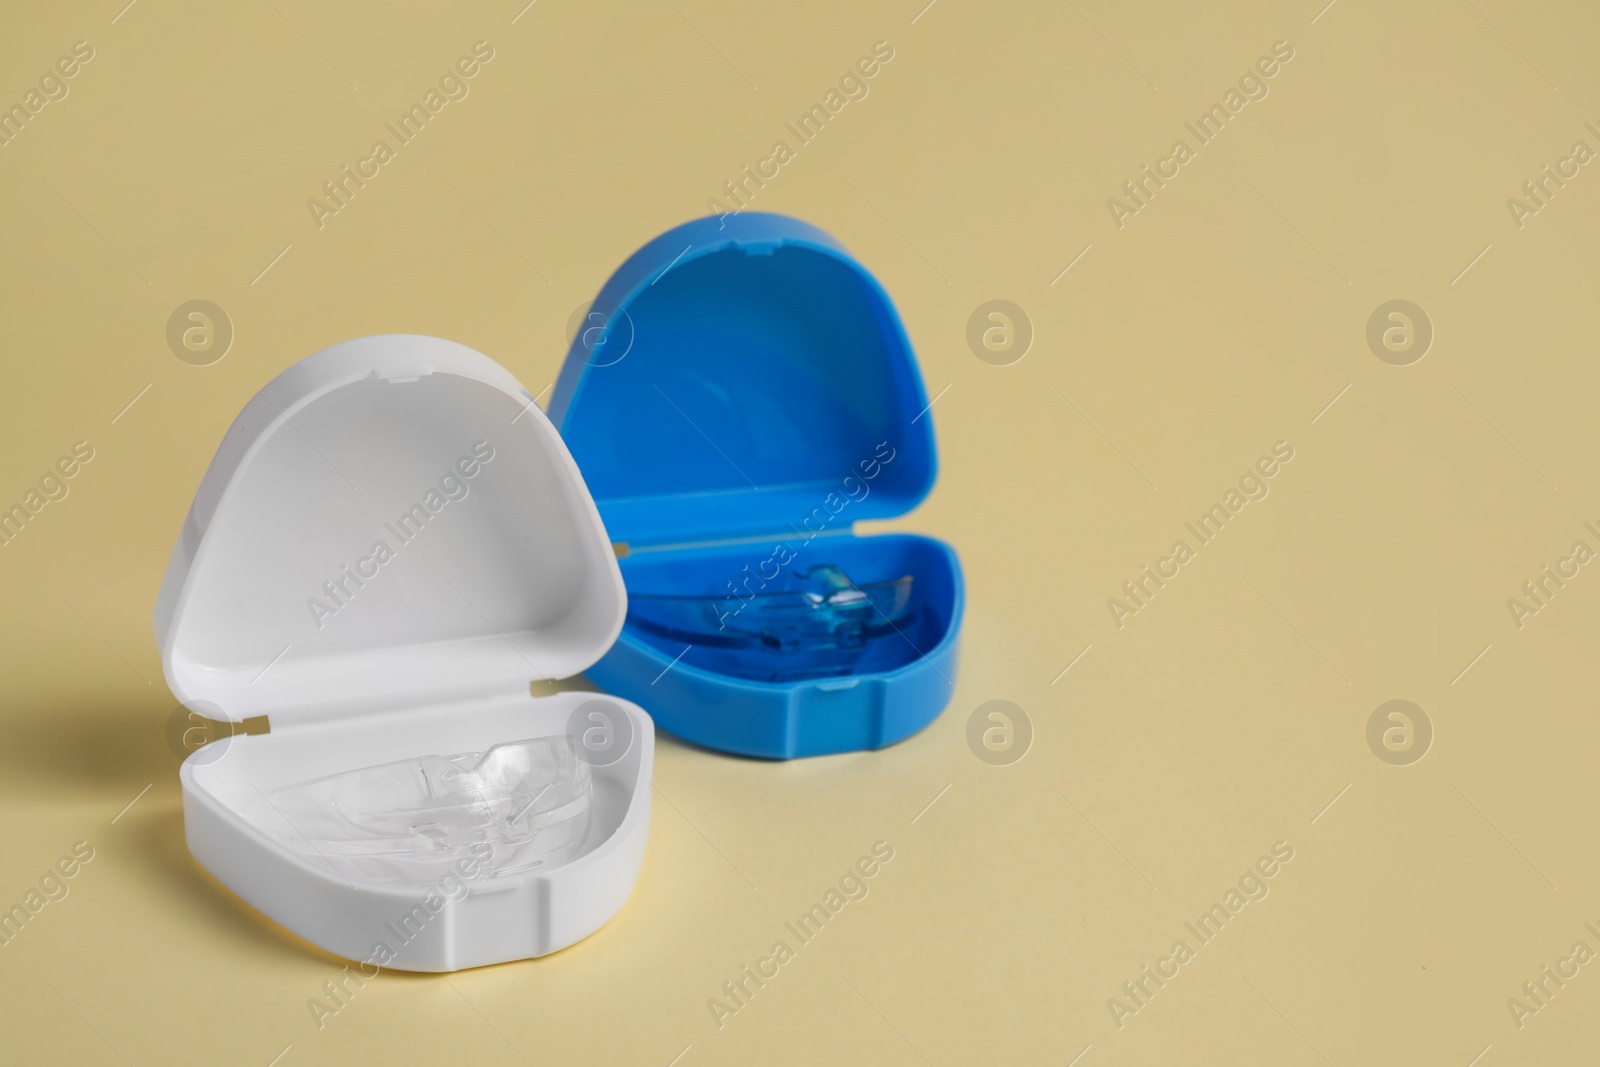 Photo of Transparent dental mouth guards in containers on beige background, space for text. Bite correction